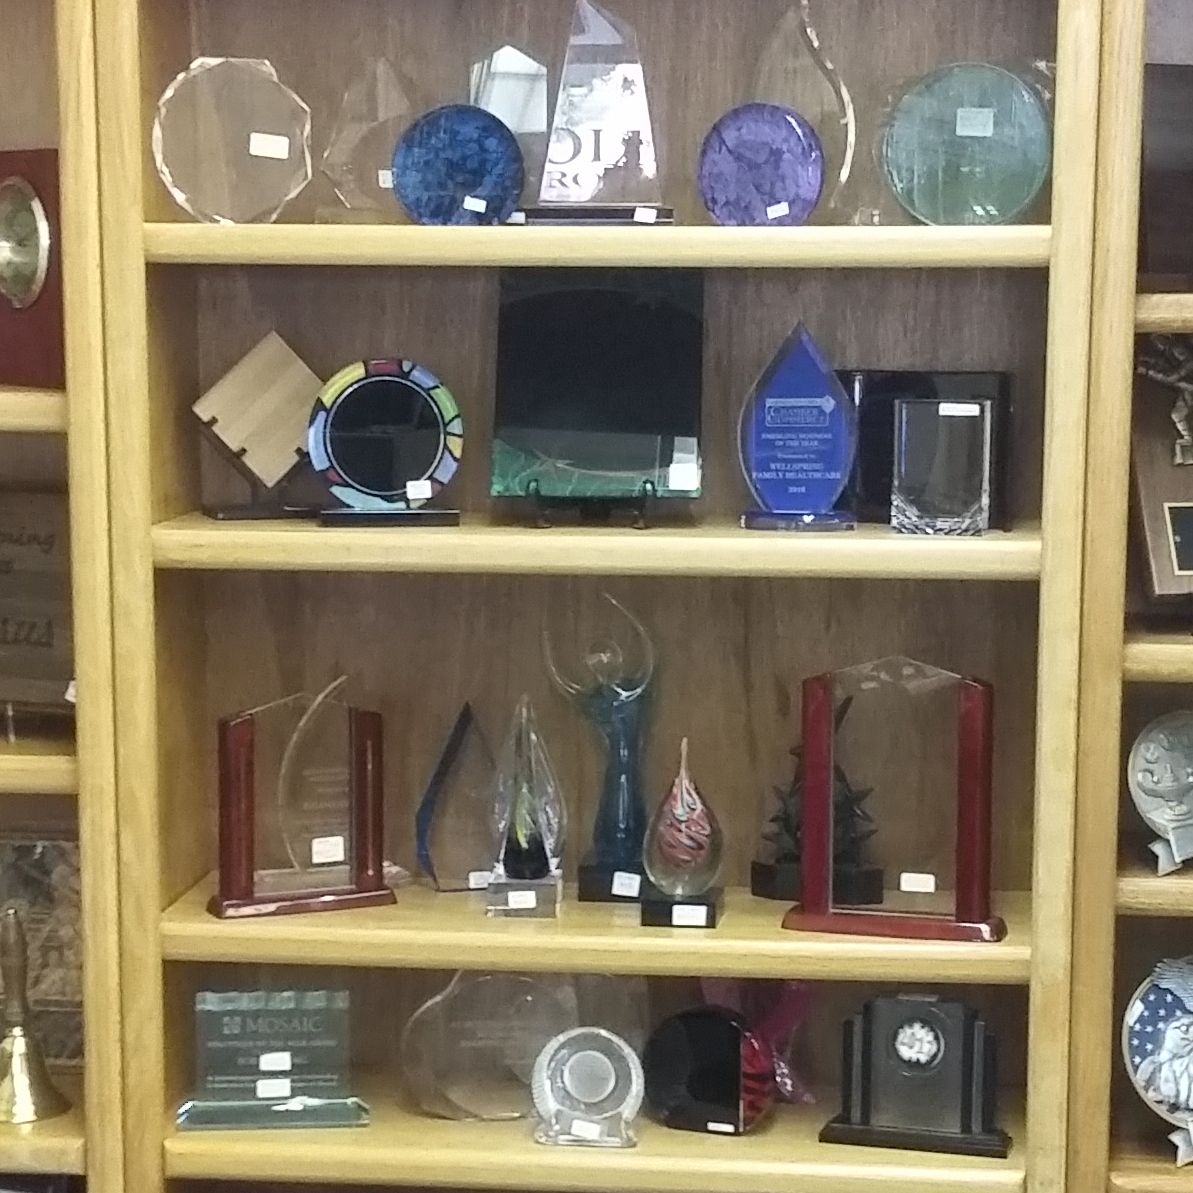 Coleen's Trophies, Awards & Gifts Photo